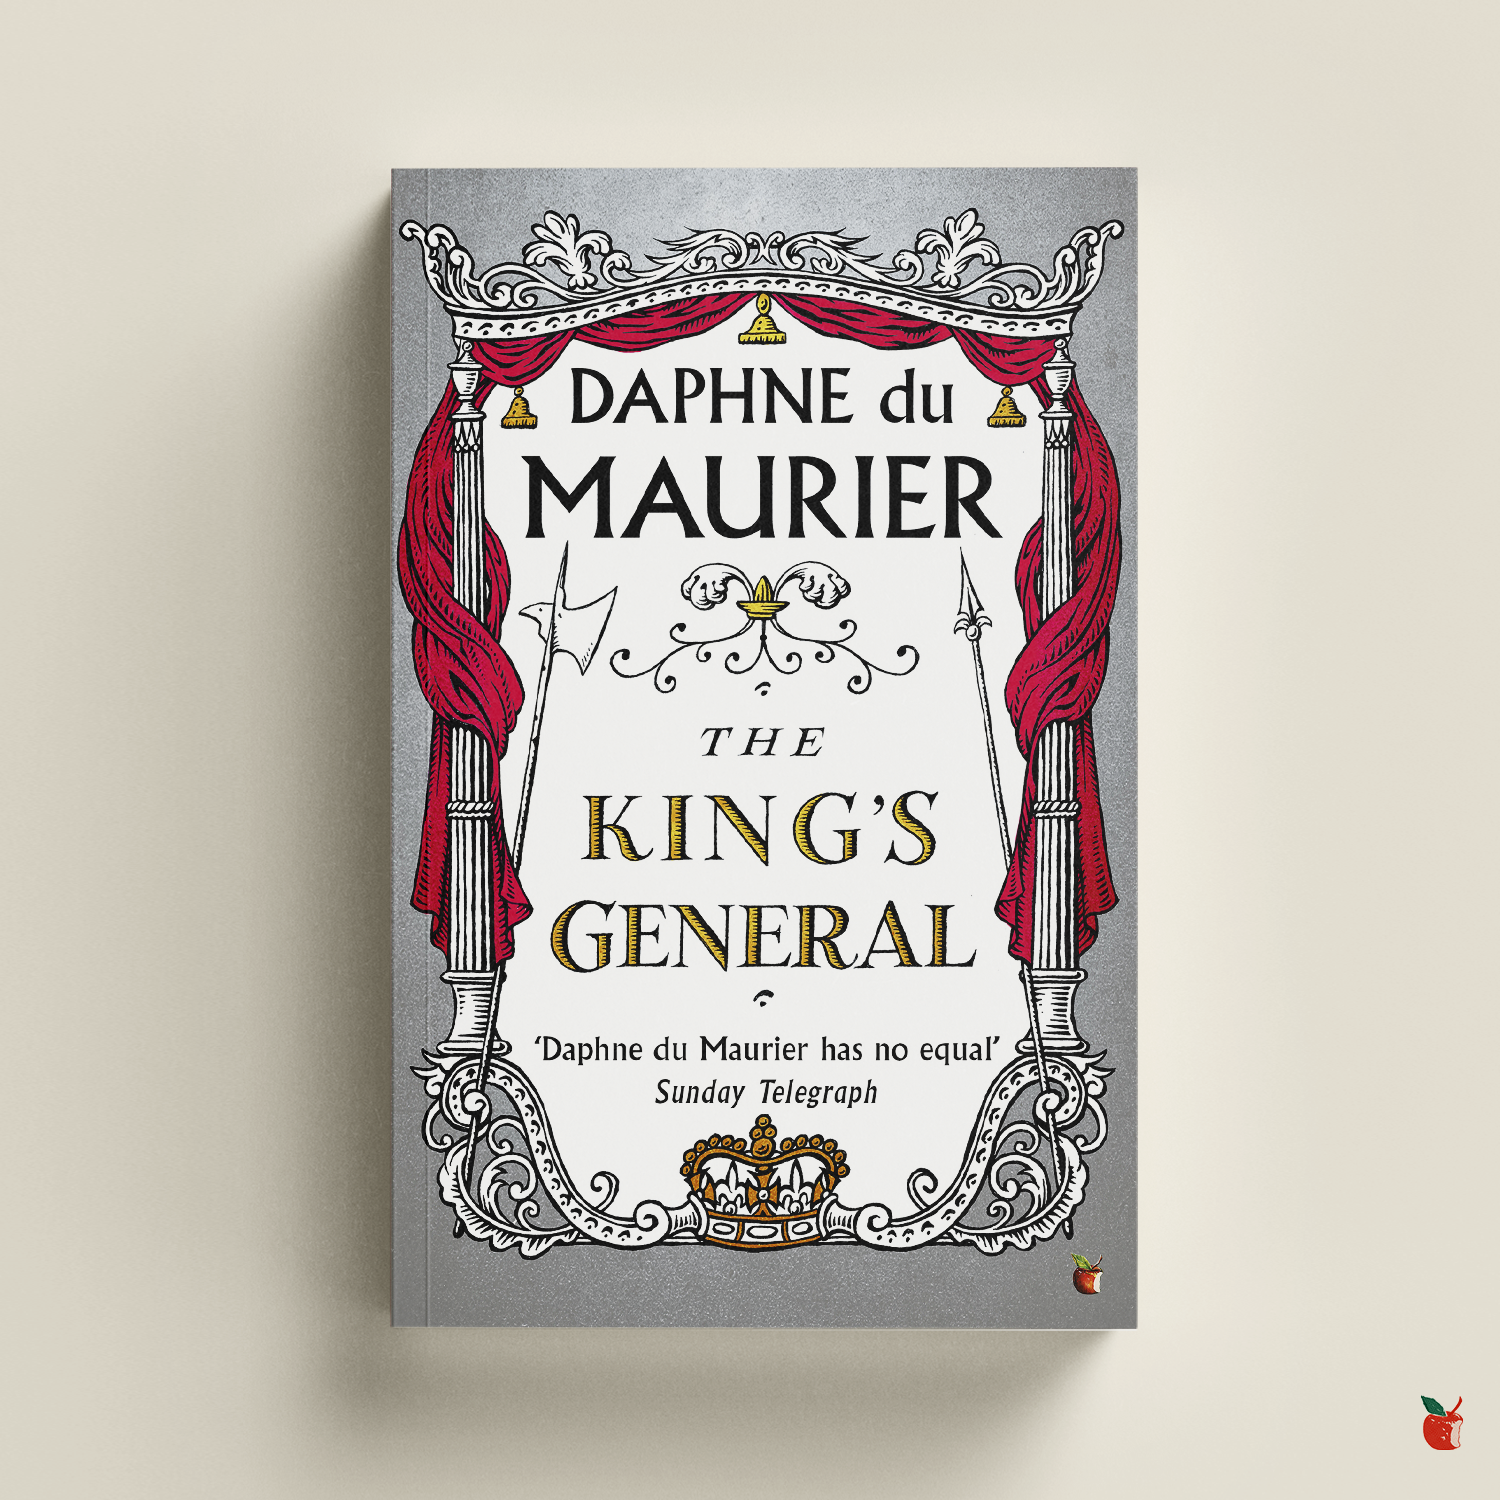 The King's General by Daphne du Maurier